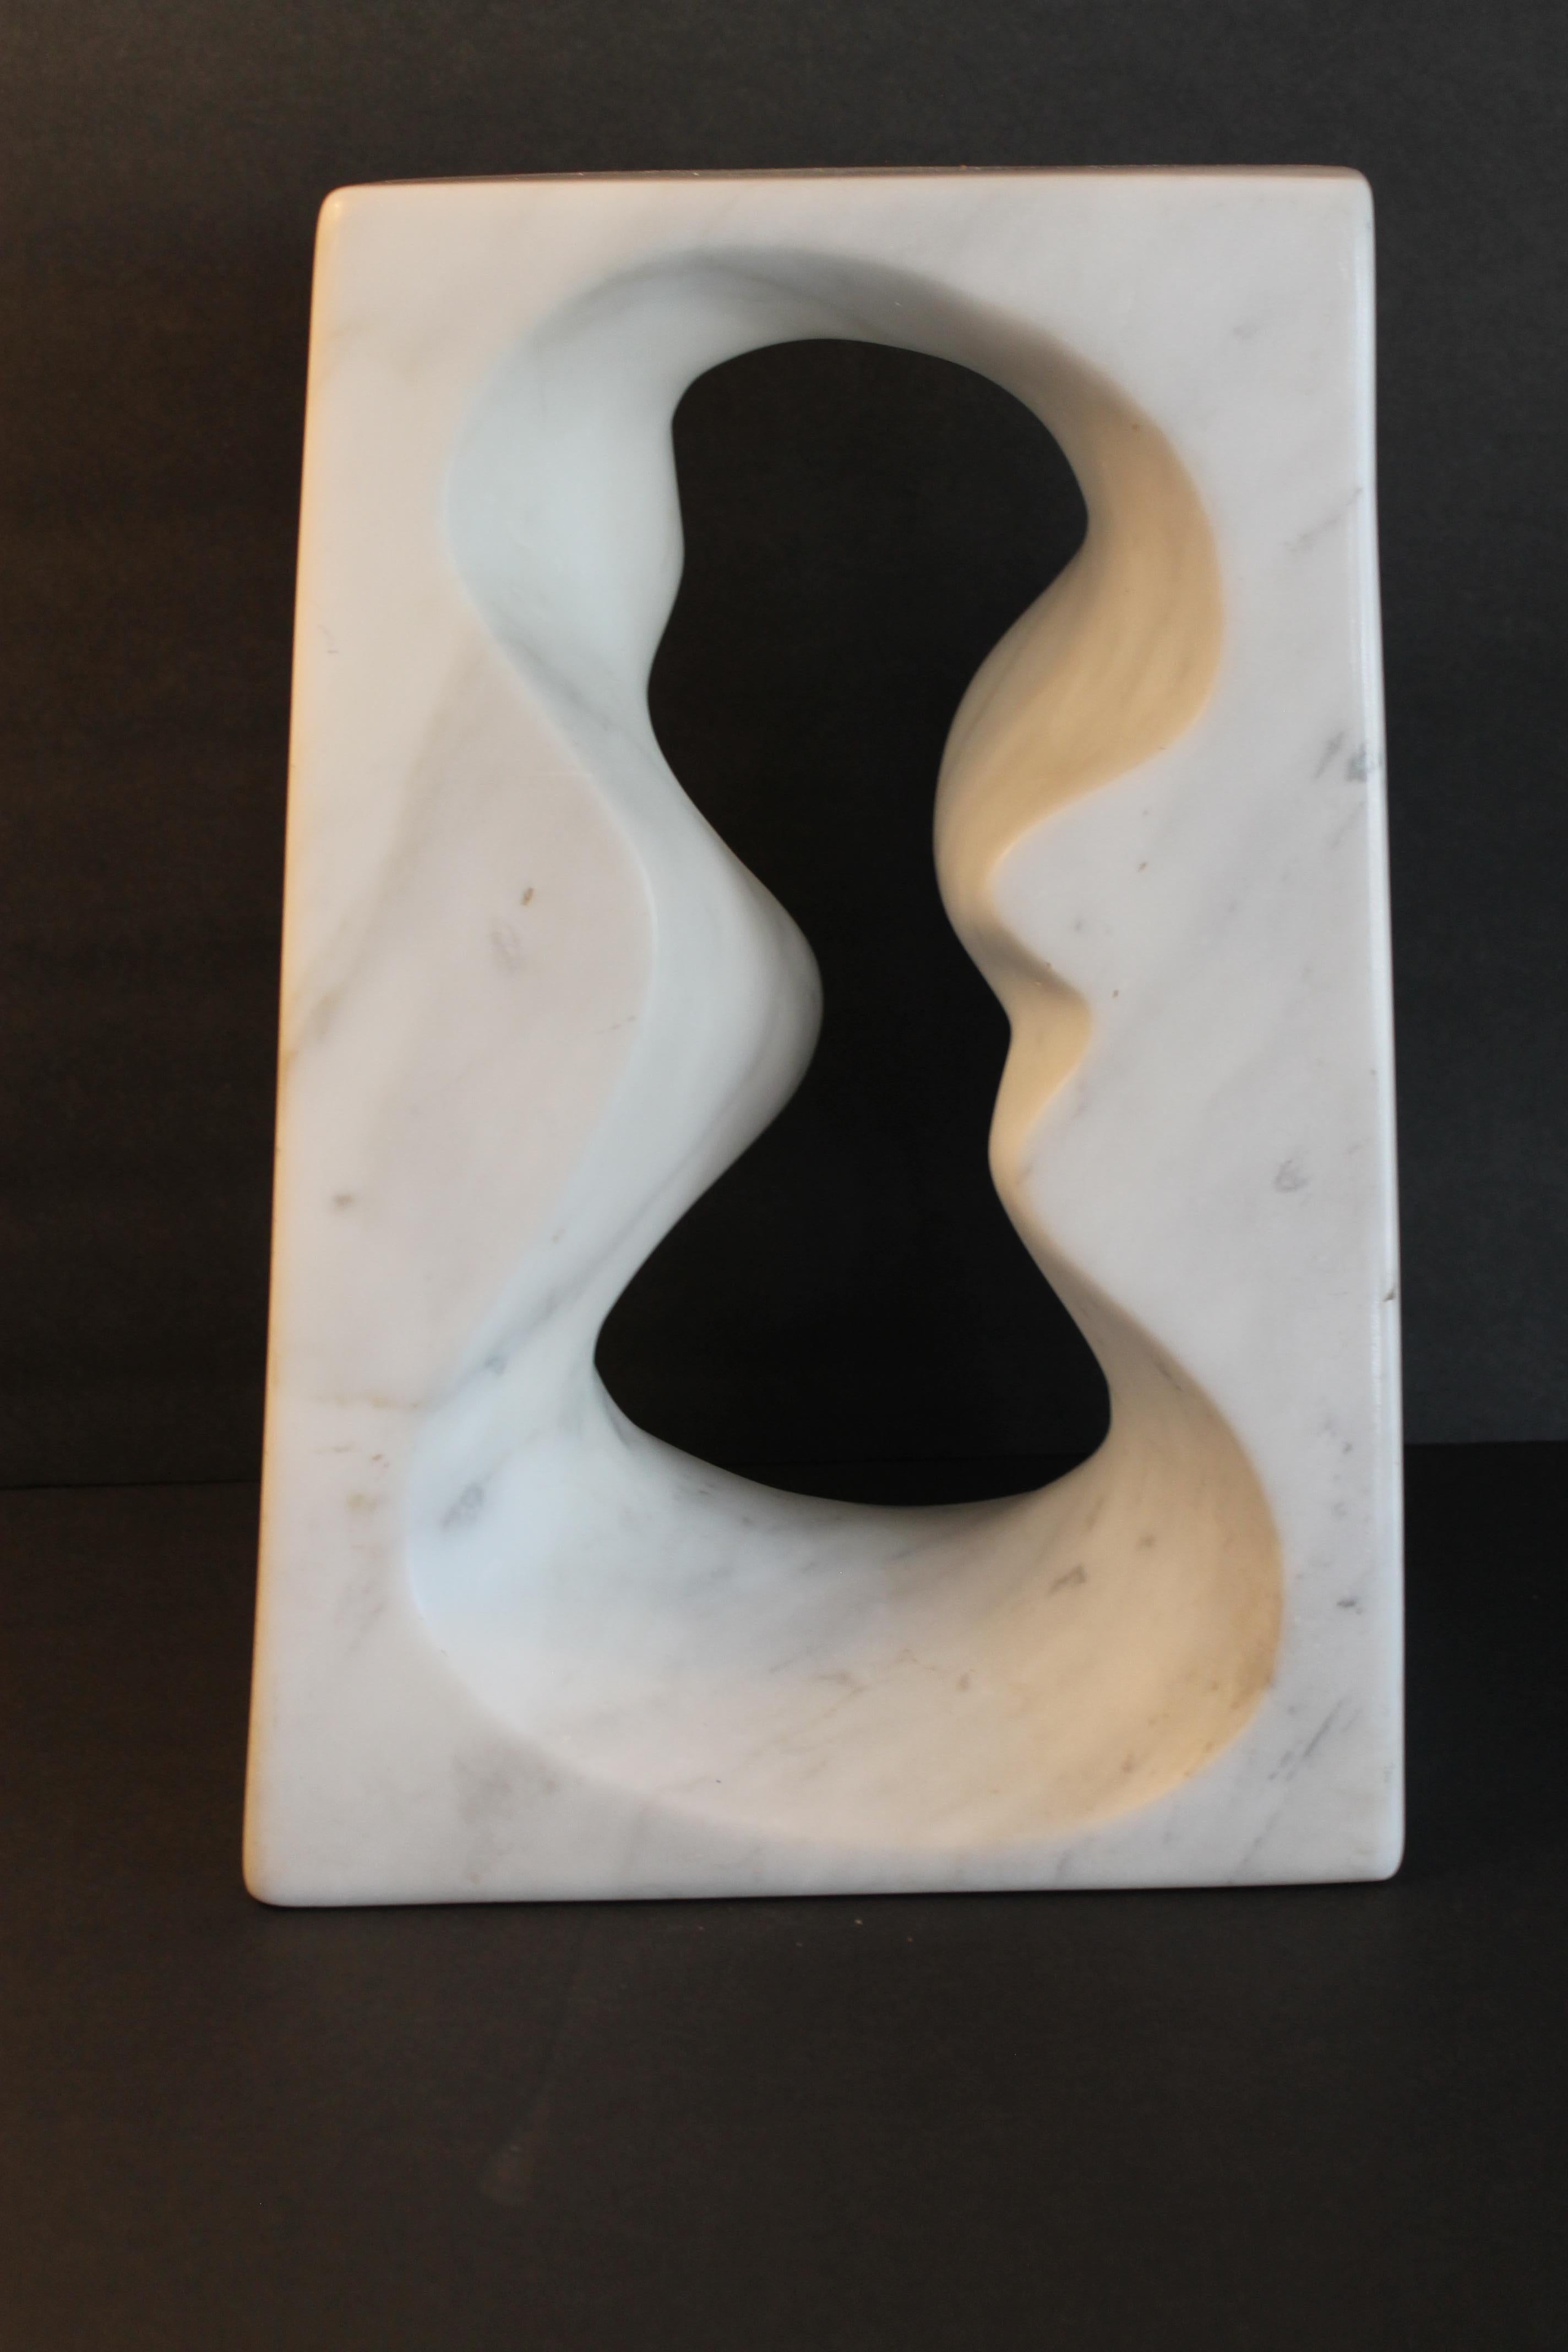 Marble sculpture signed M.M. Sculpture is white with grayish veins. Sculpture measures: 10.5